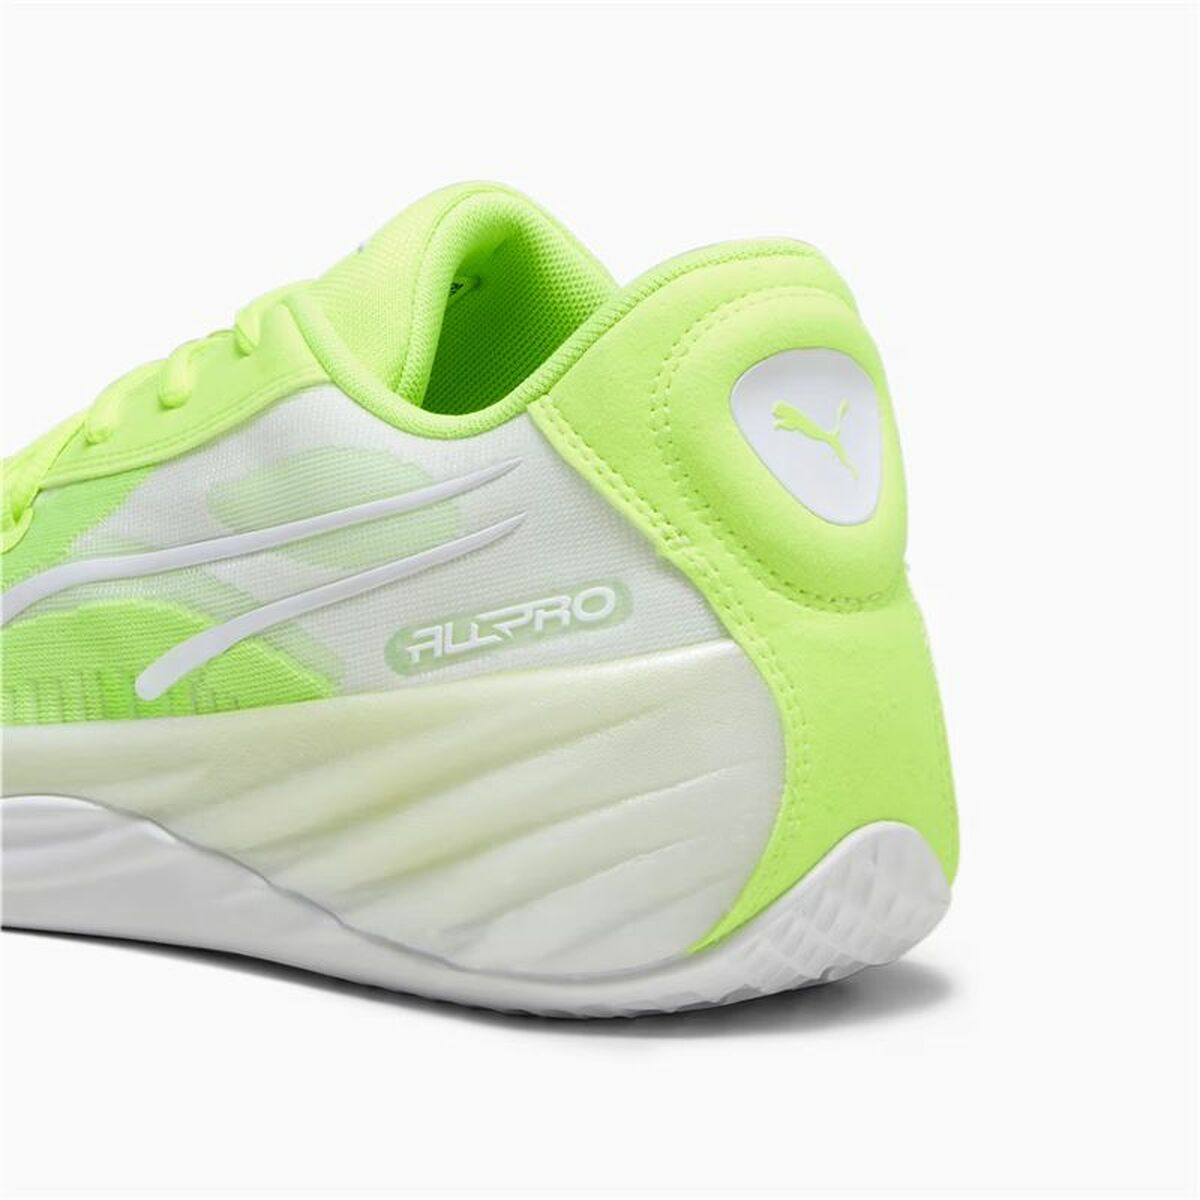 Basketball Shoes for Adults Puma All-Pro Nitro Yellow